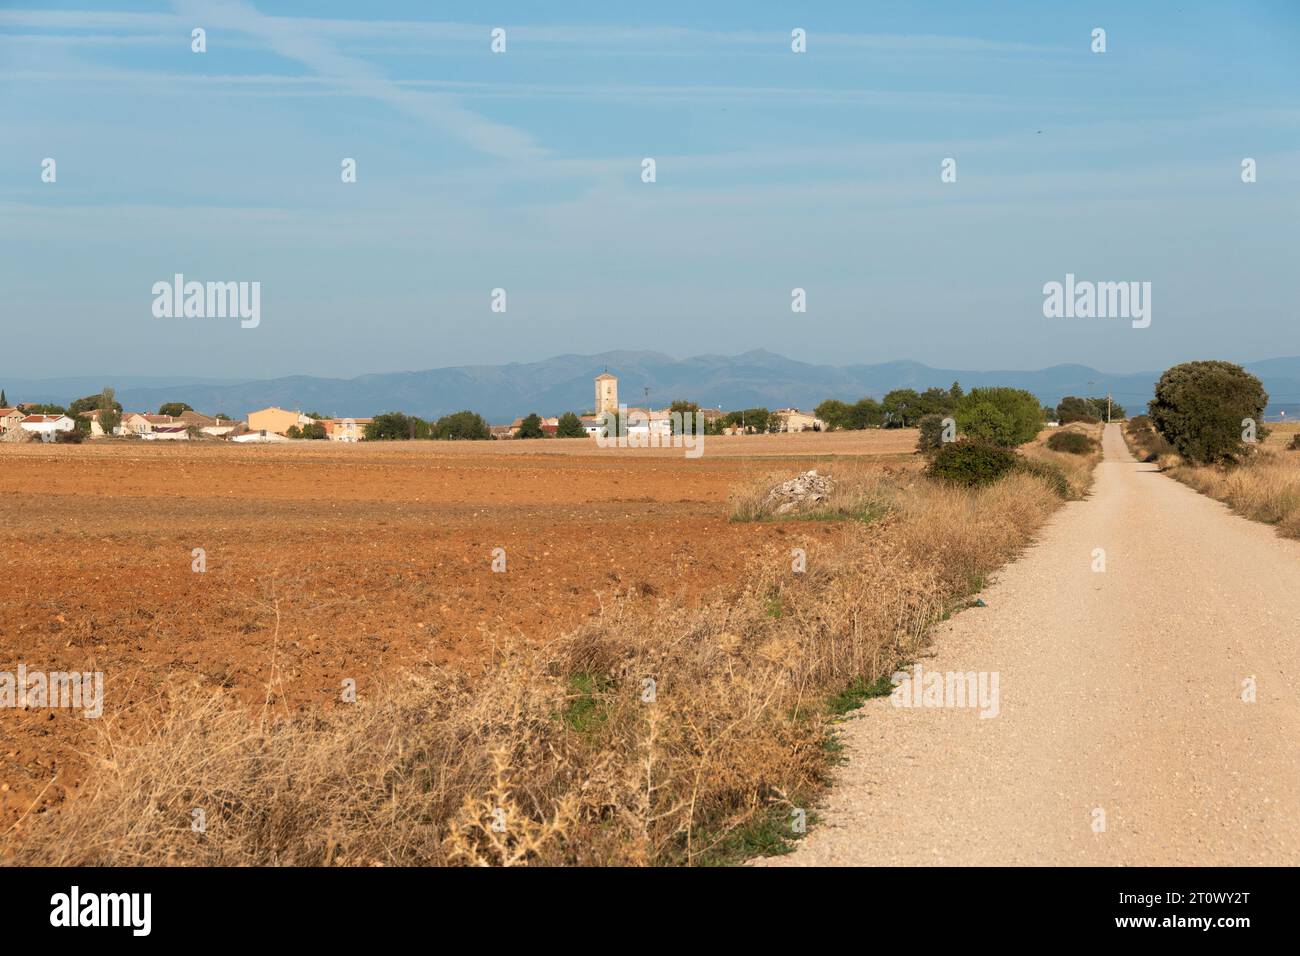 landscape of agriculture fields in spain Stock Photo